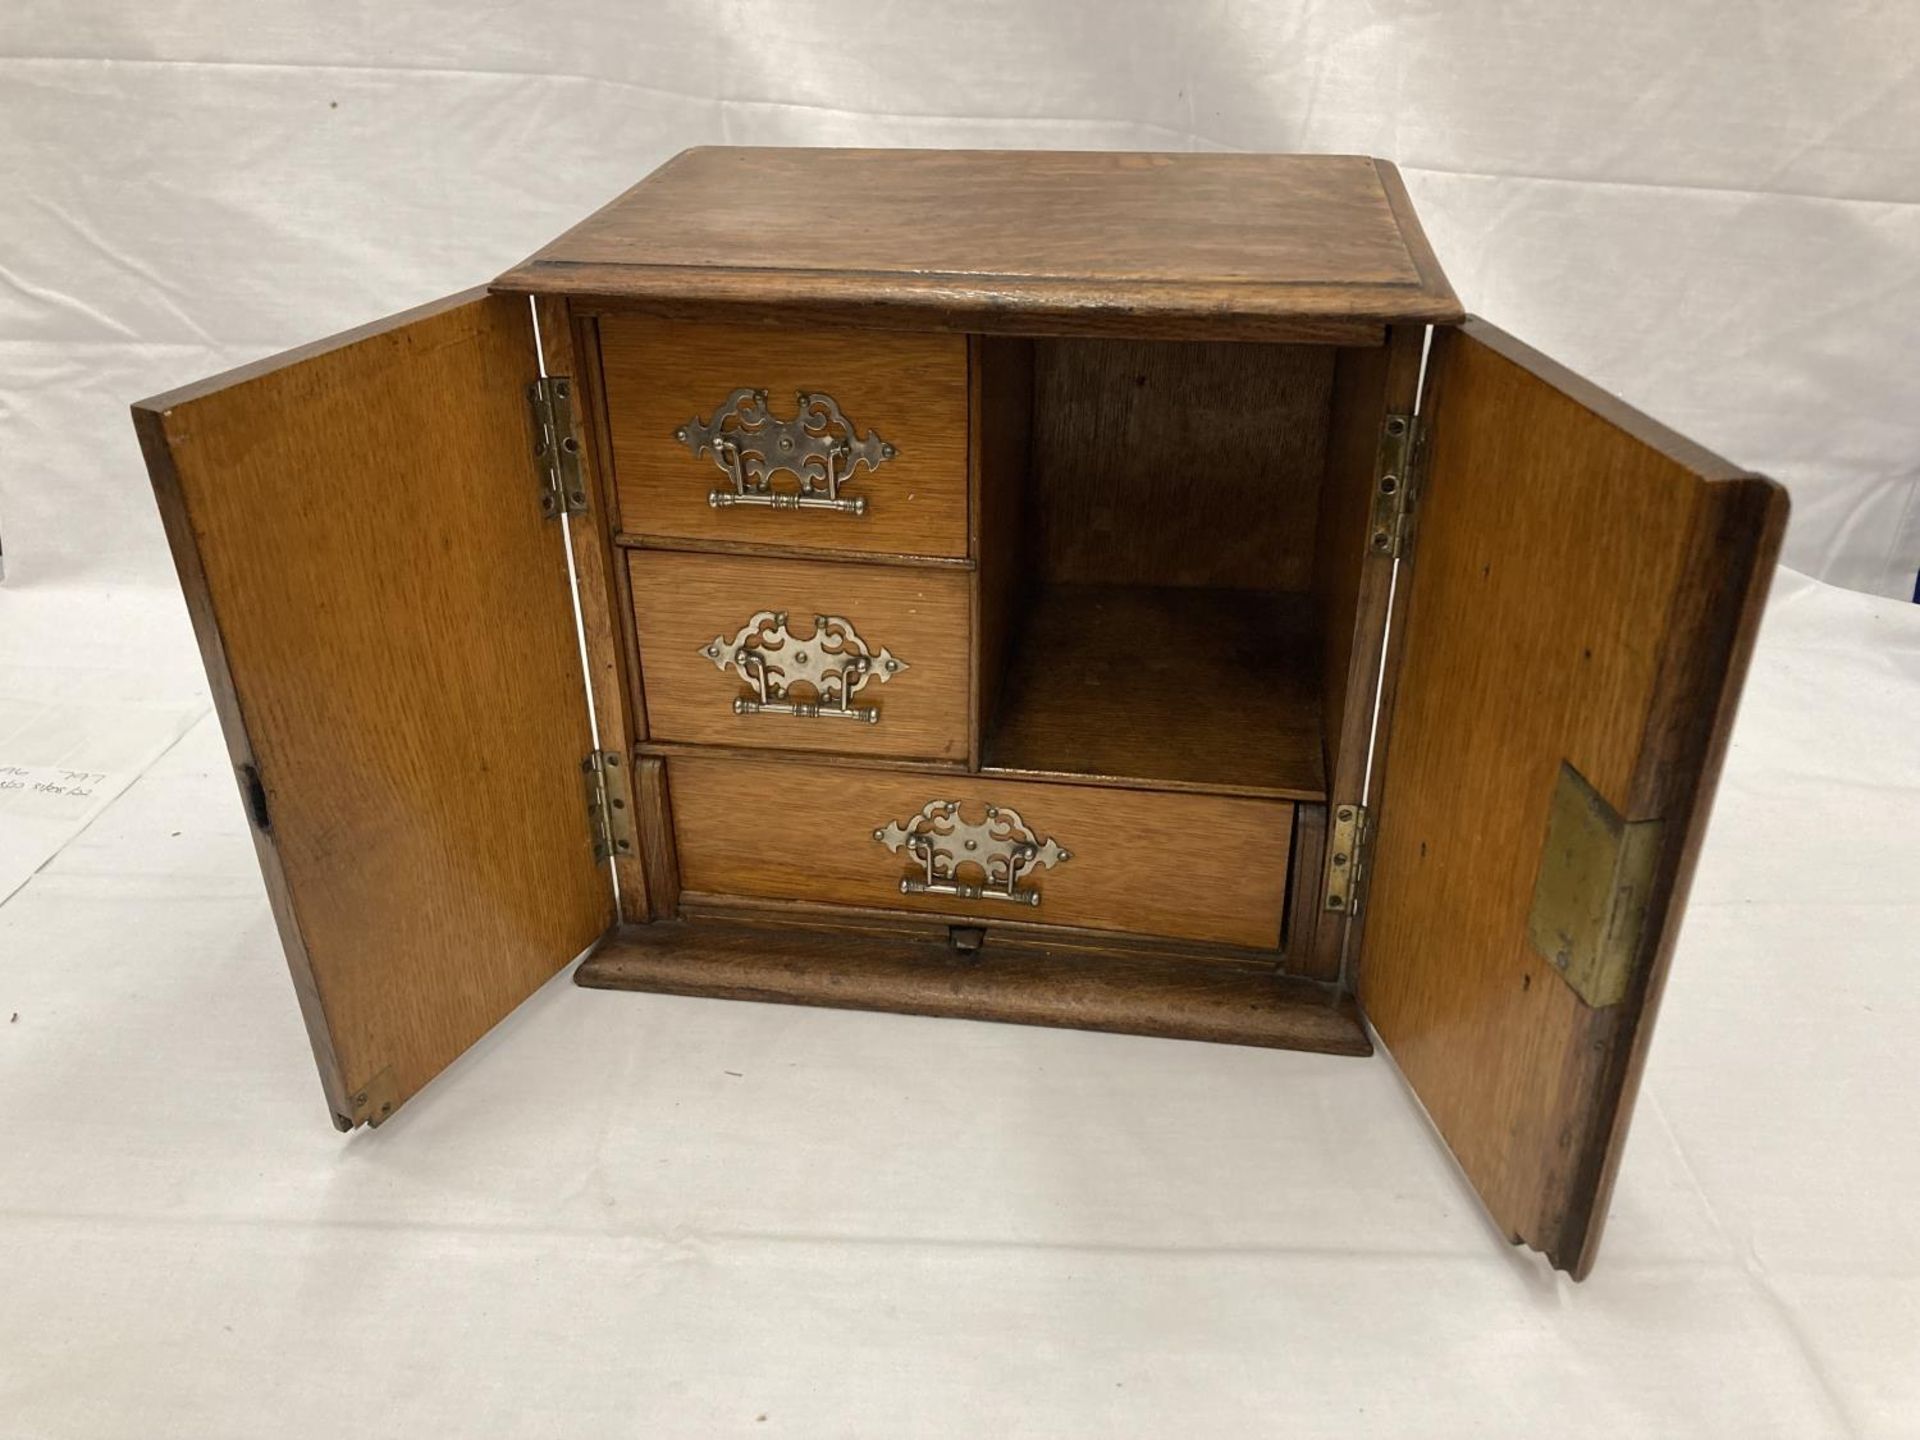 AN OAK SMOKERS CABINET WITH THREE ENCLOSED DRAWERS H: 30CM, W: 32CM